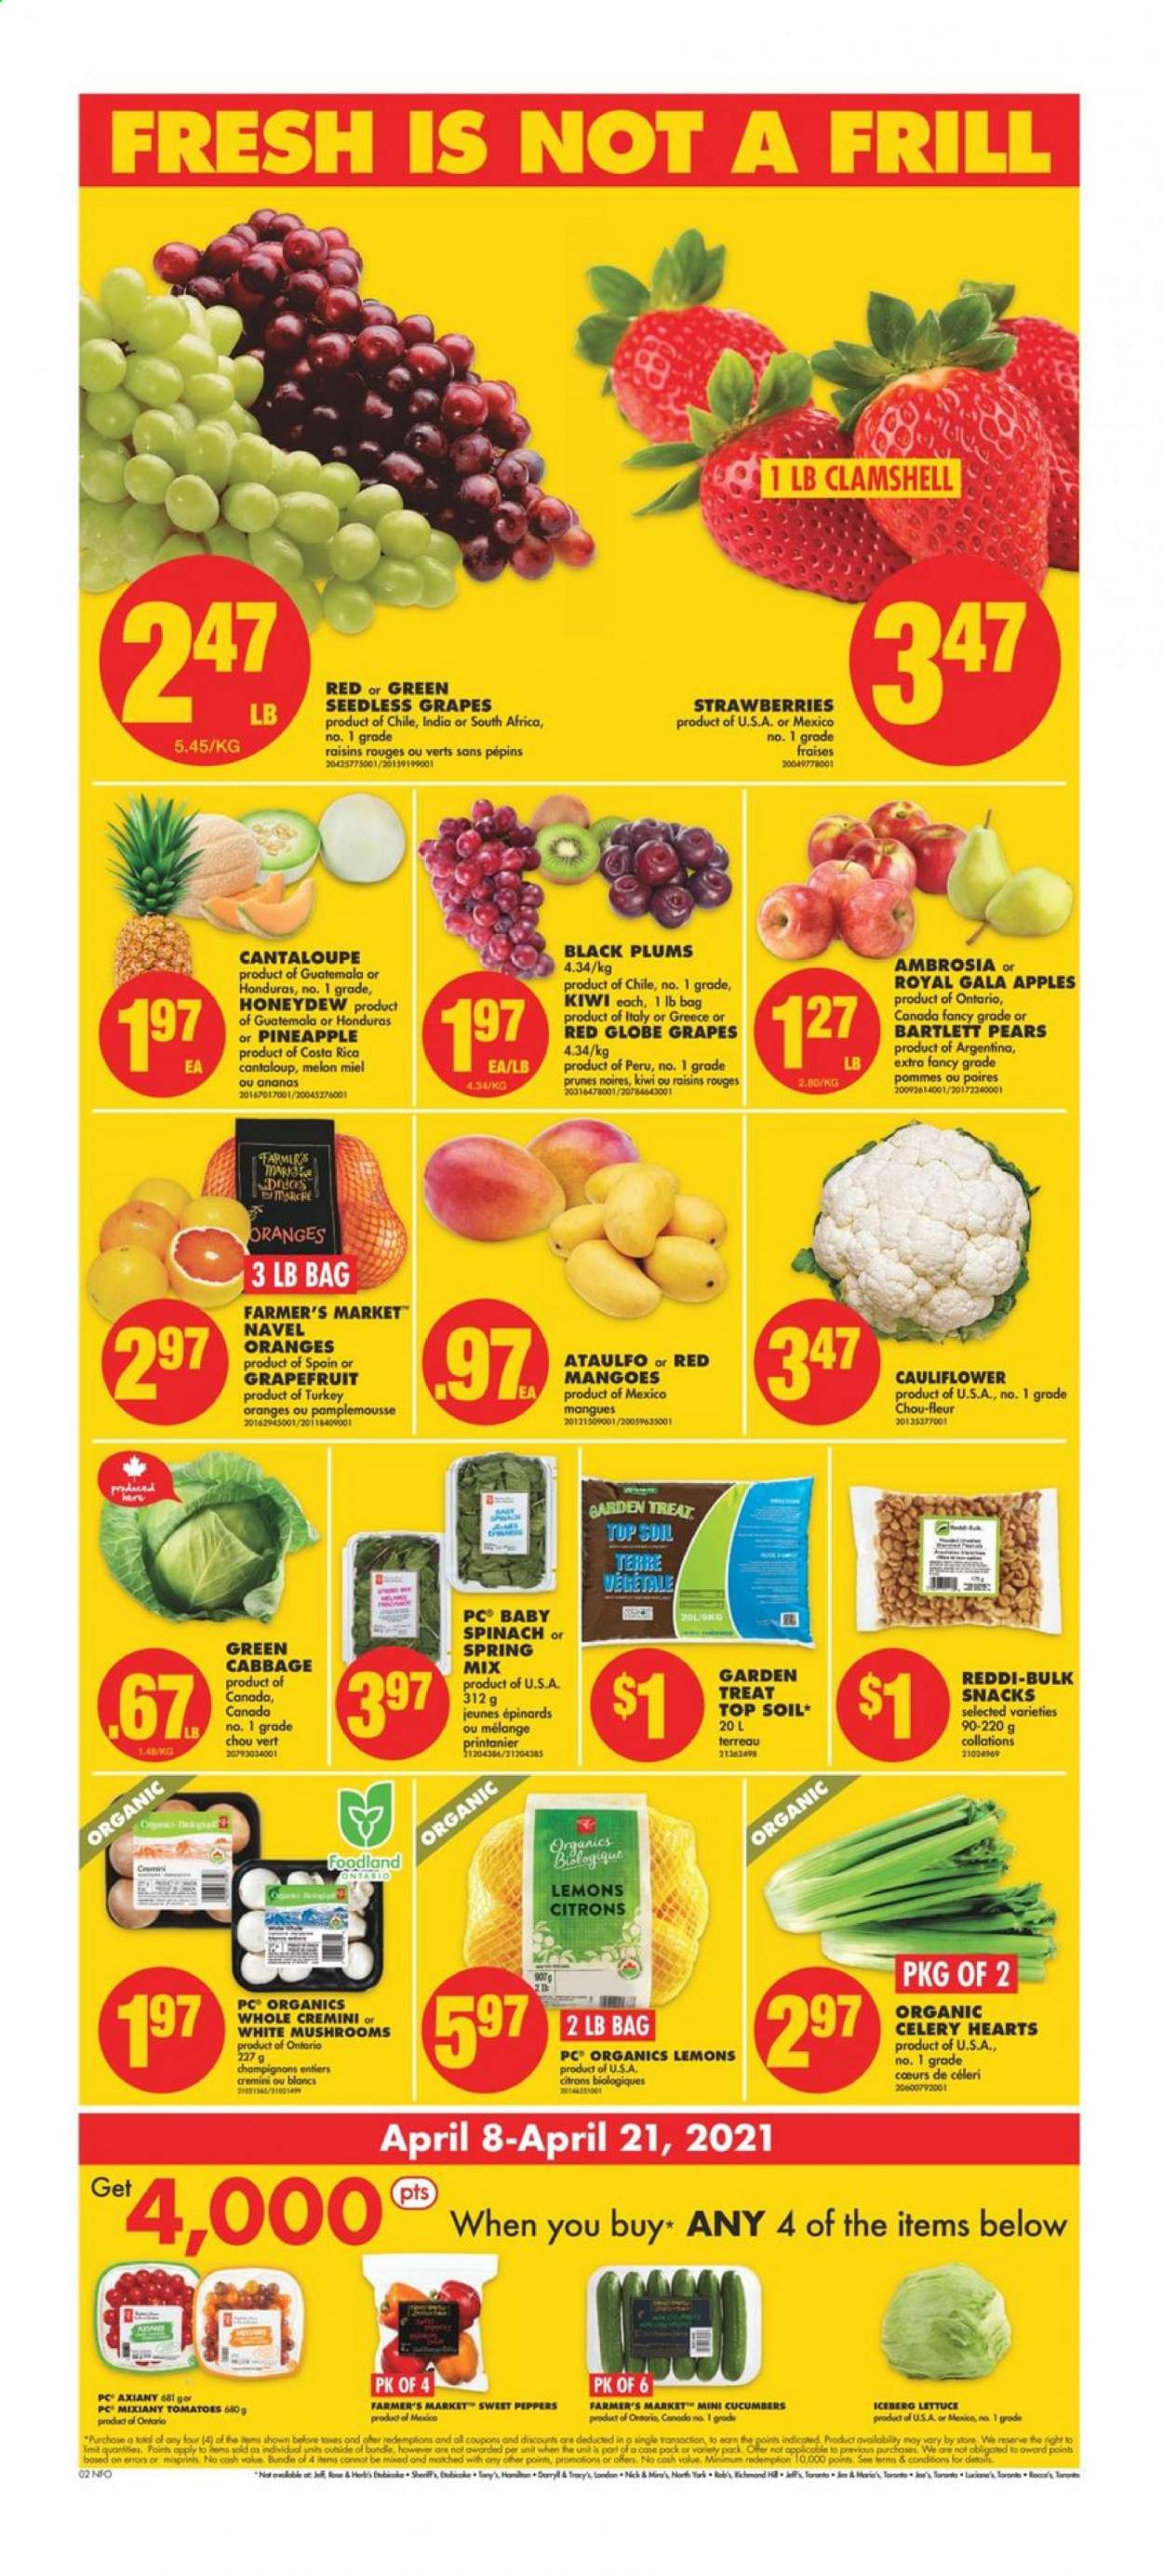 thumbnail - No Frills Flyer - April 08, 2021 - April 14, 2021 - Sales products - mushrooms, cantaloupe, cauliflower, celery, cucumber, sweet peppers, tomatoes, peppers, sleeved celery, apples, Bartlett pears, Gala, grapefruits, grapes, Red Globe, seedless grapes, strawberries, honeydew, plums, pears, melons, lemons, black plums, navel oranges, snack, prunes, dried fruit, kiwi, raisins. Page 3.